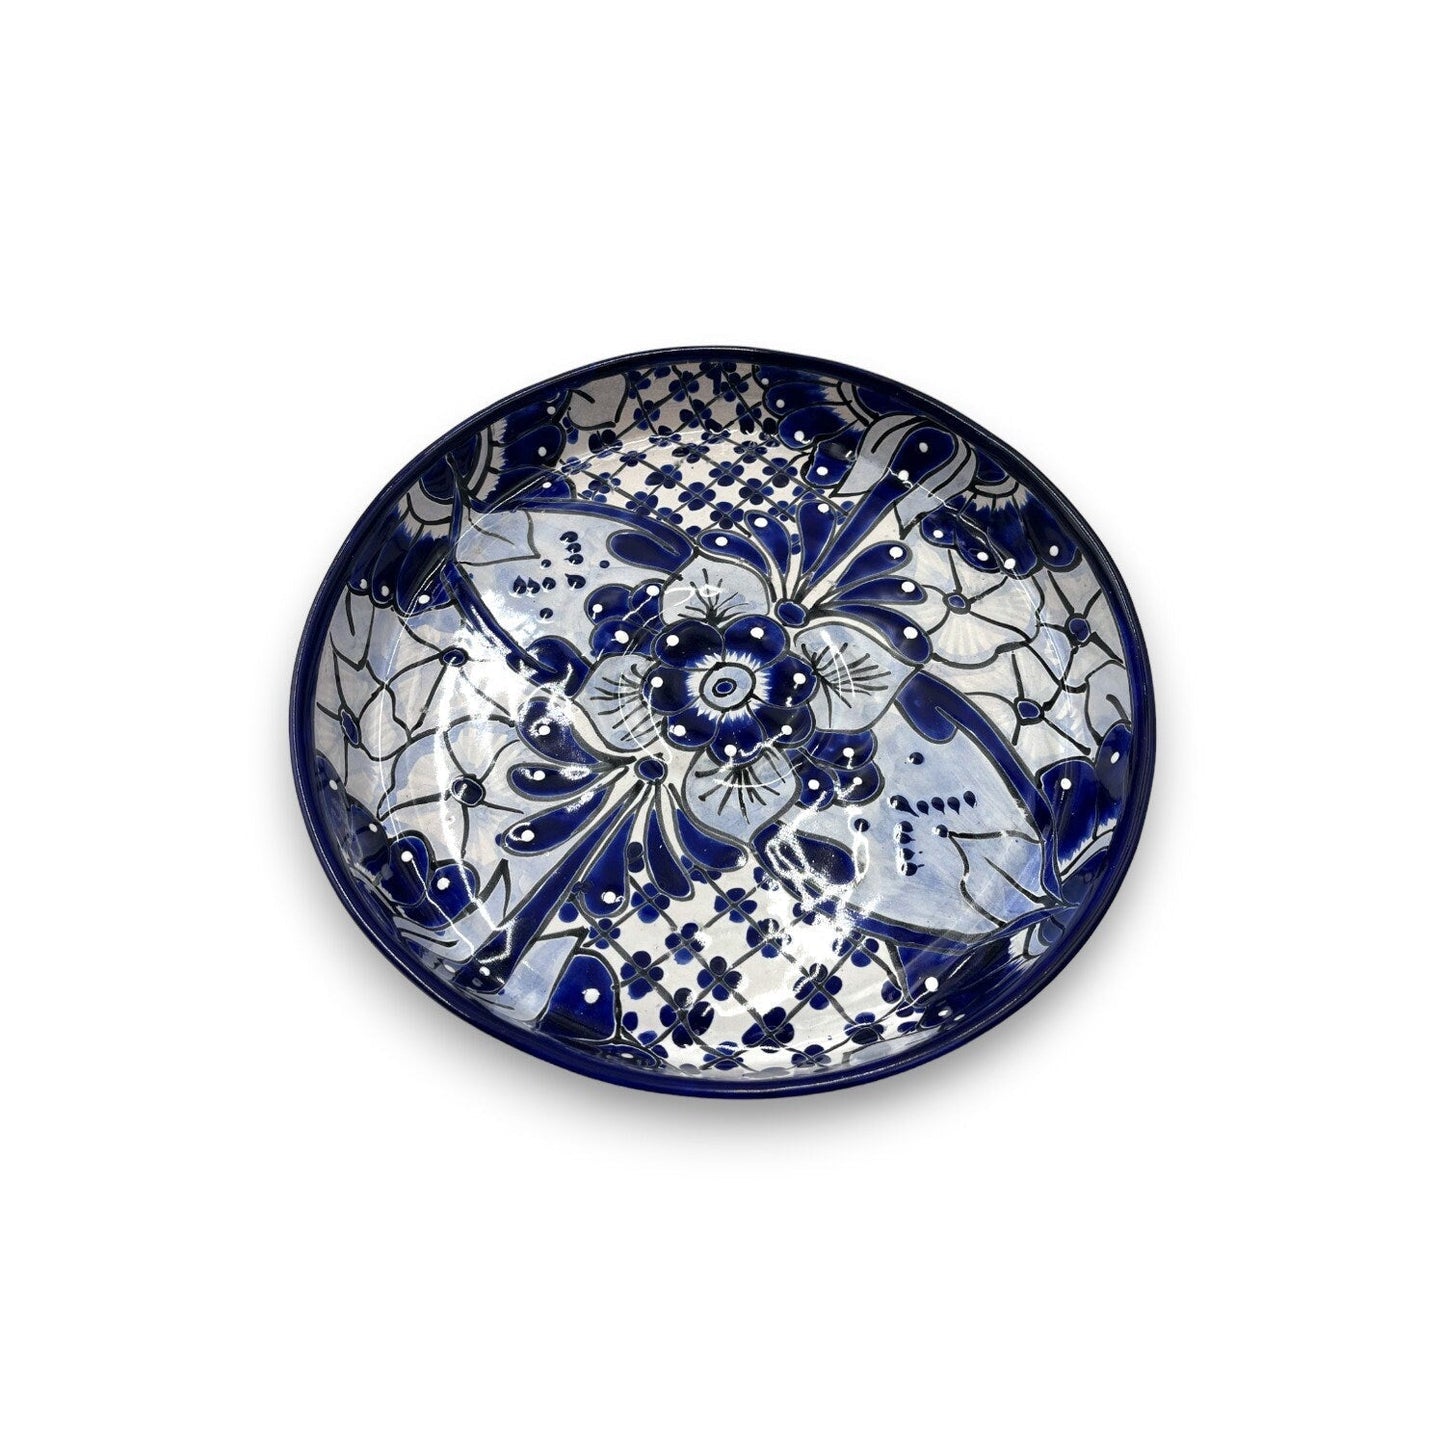 Mexican Handmade Talavera Sectional Appetizer Tray | Hand Painted Pottery